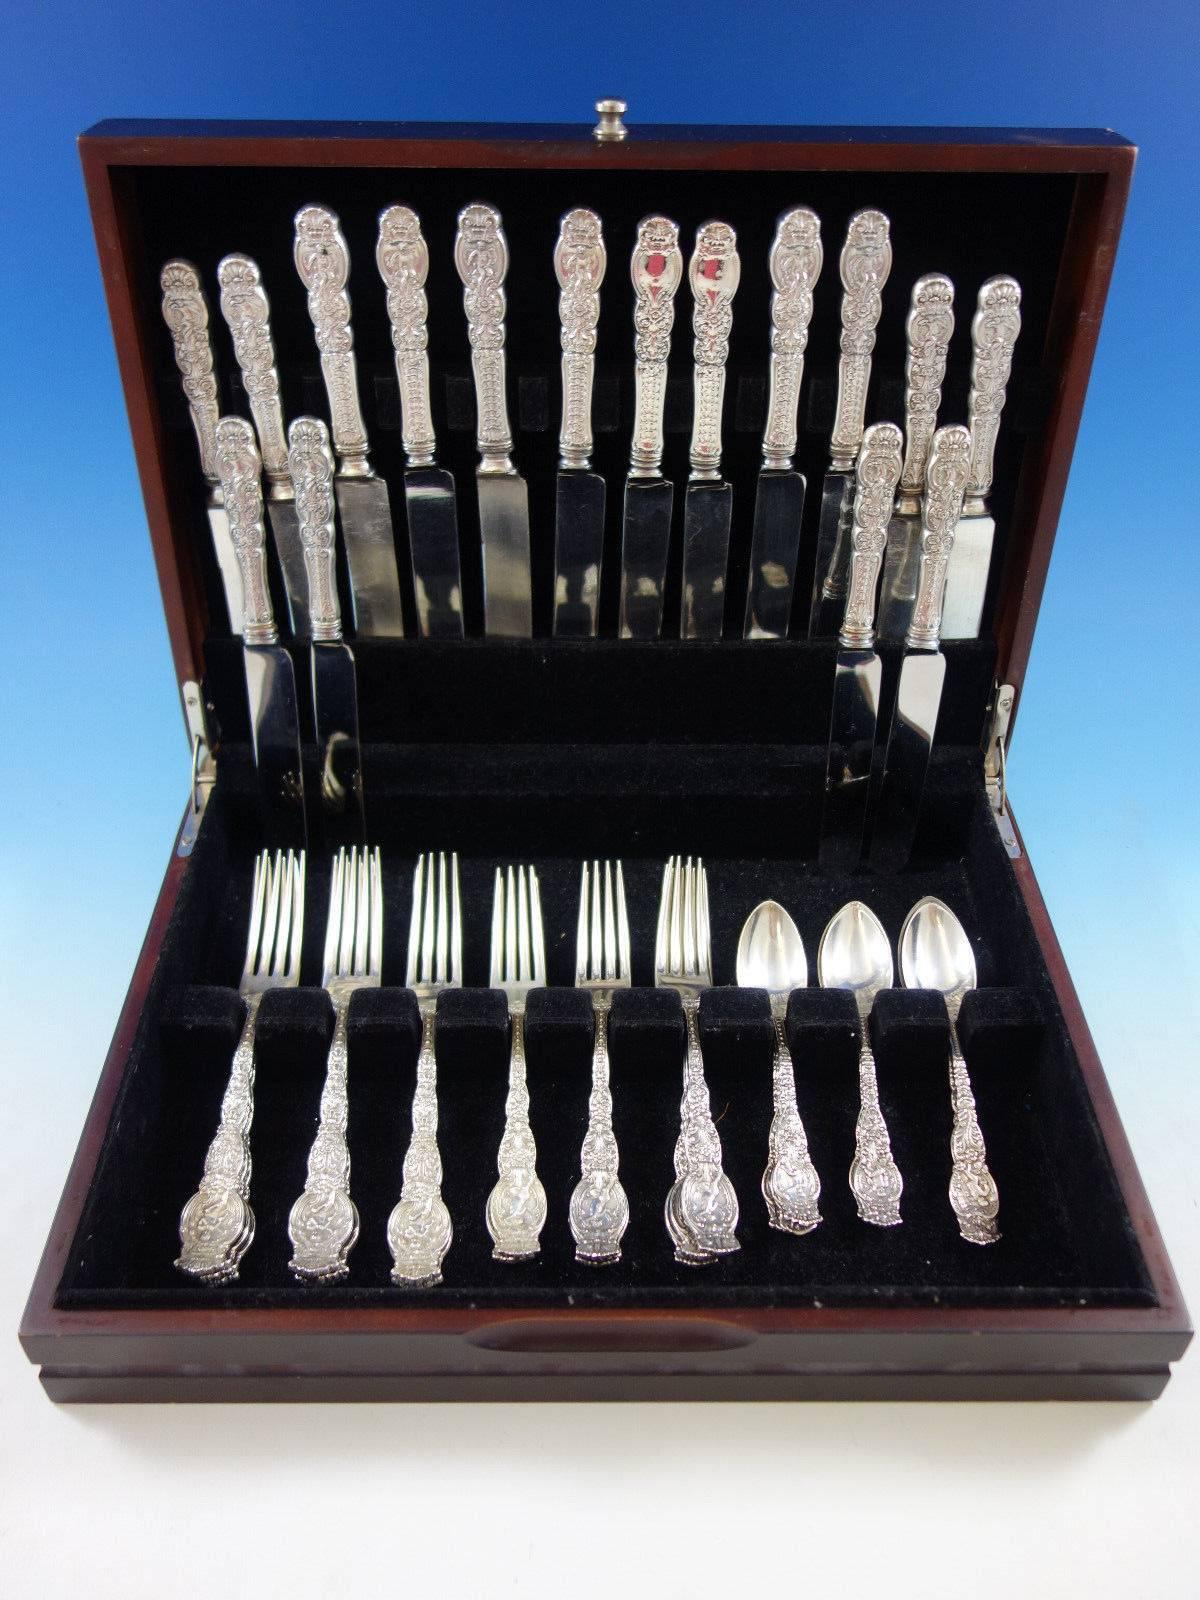 Rare Ariel by Wendell figural multi-motif sterling silver dinner and luncheon flatware set, 40 pieces. This set includes: 

eight dinner size knives, blunt blades, 9 3/4